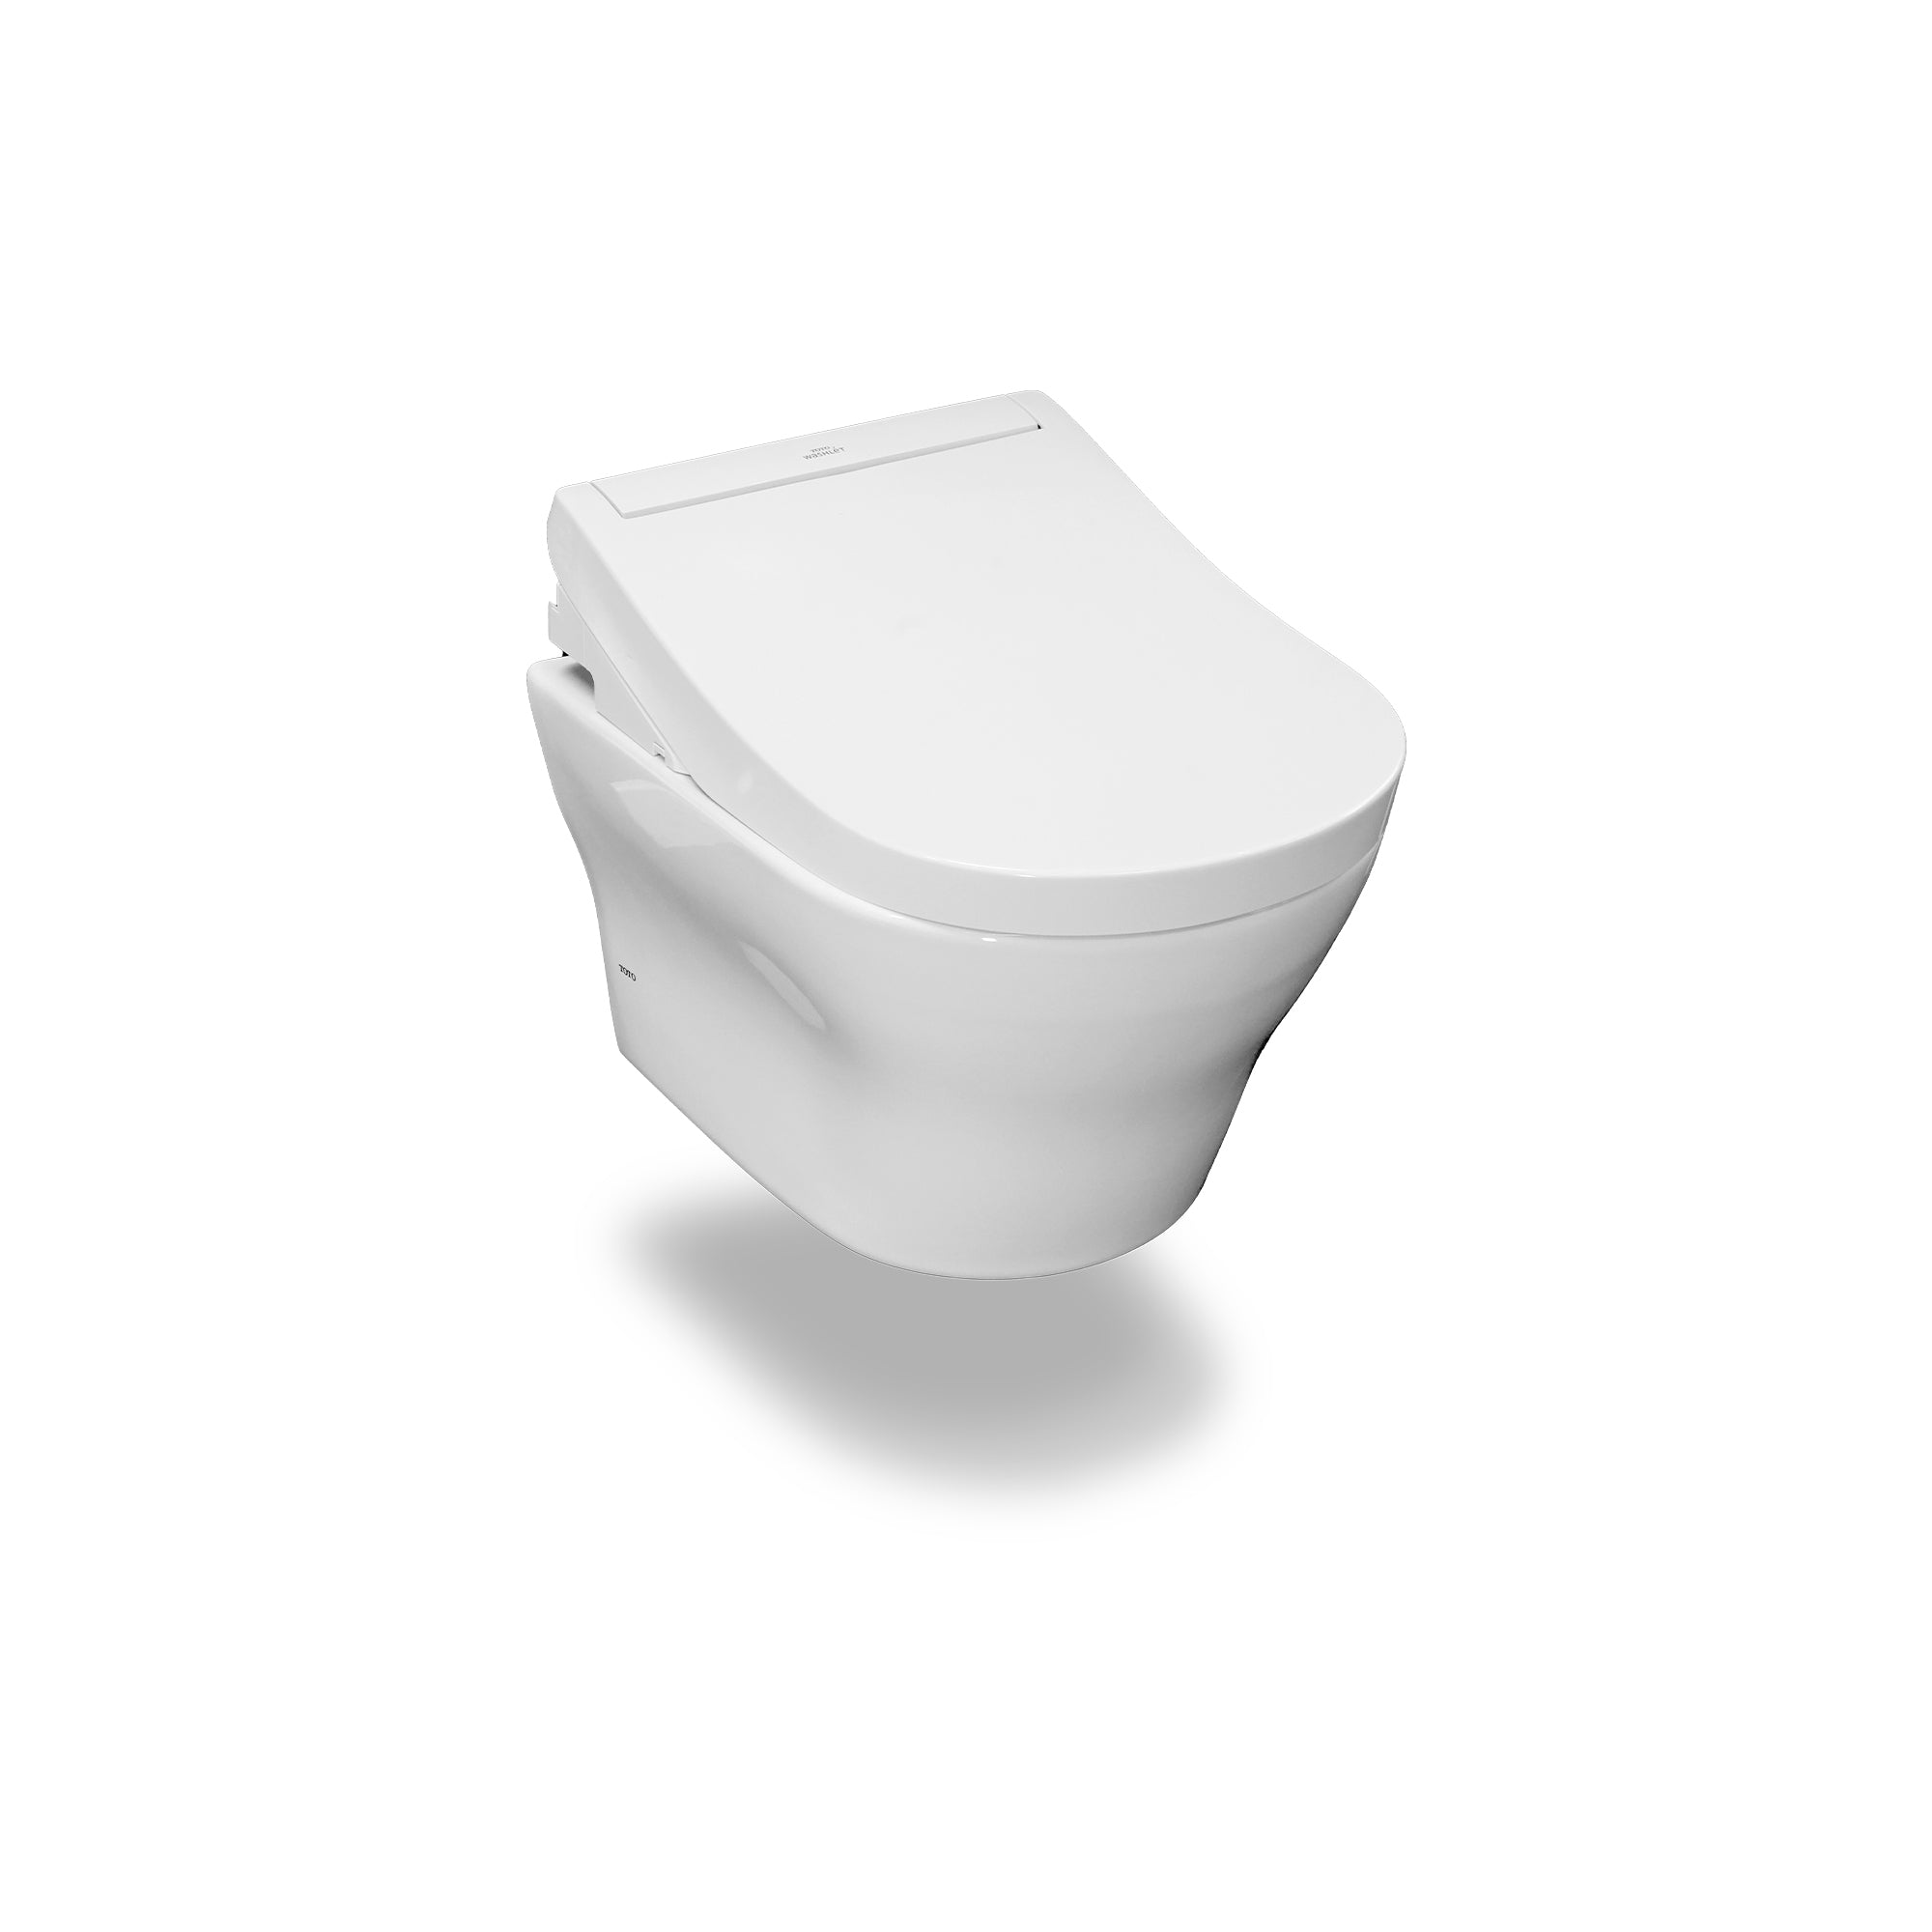 TOTO MH WALL HUNG TOILET AND S5 WASHLET W/ REMOTE CONTROL PACKAGE (D-SHAPED) GLOSS WHITE